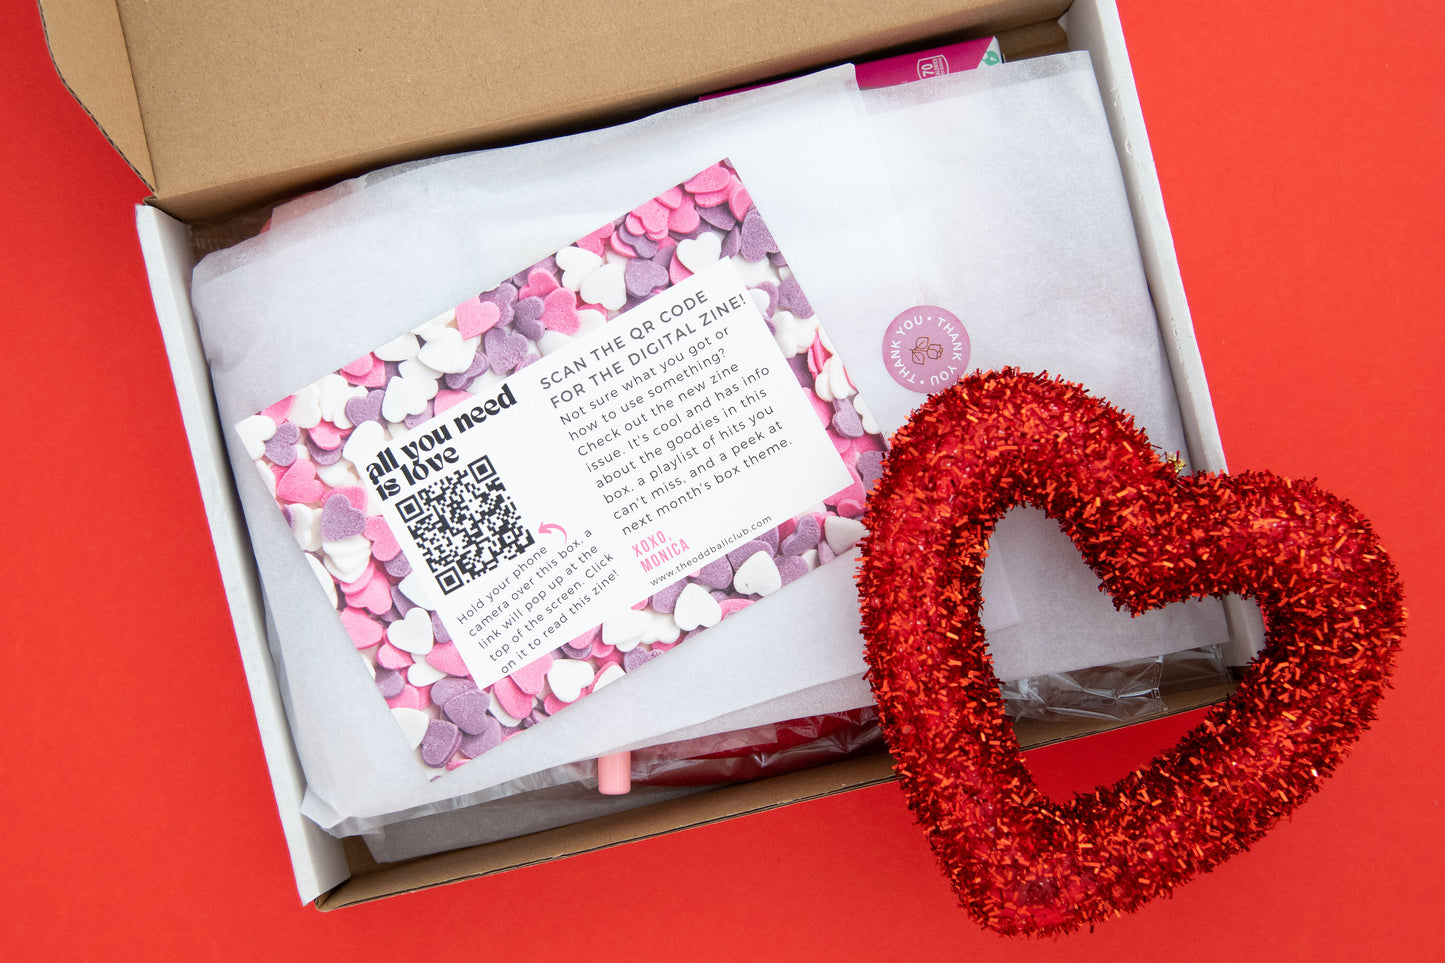 Love-themed subscription box contents with red sparkle heart on white tissue paper - heart-shaped sunglasses, rose petal soap, heart-shaped candle, love potion bath bombs, heart-shaped silicone ice cube tray, and love-themed greeting card with roses.